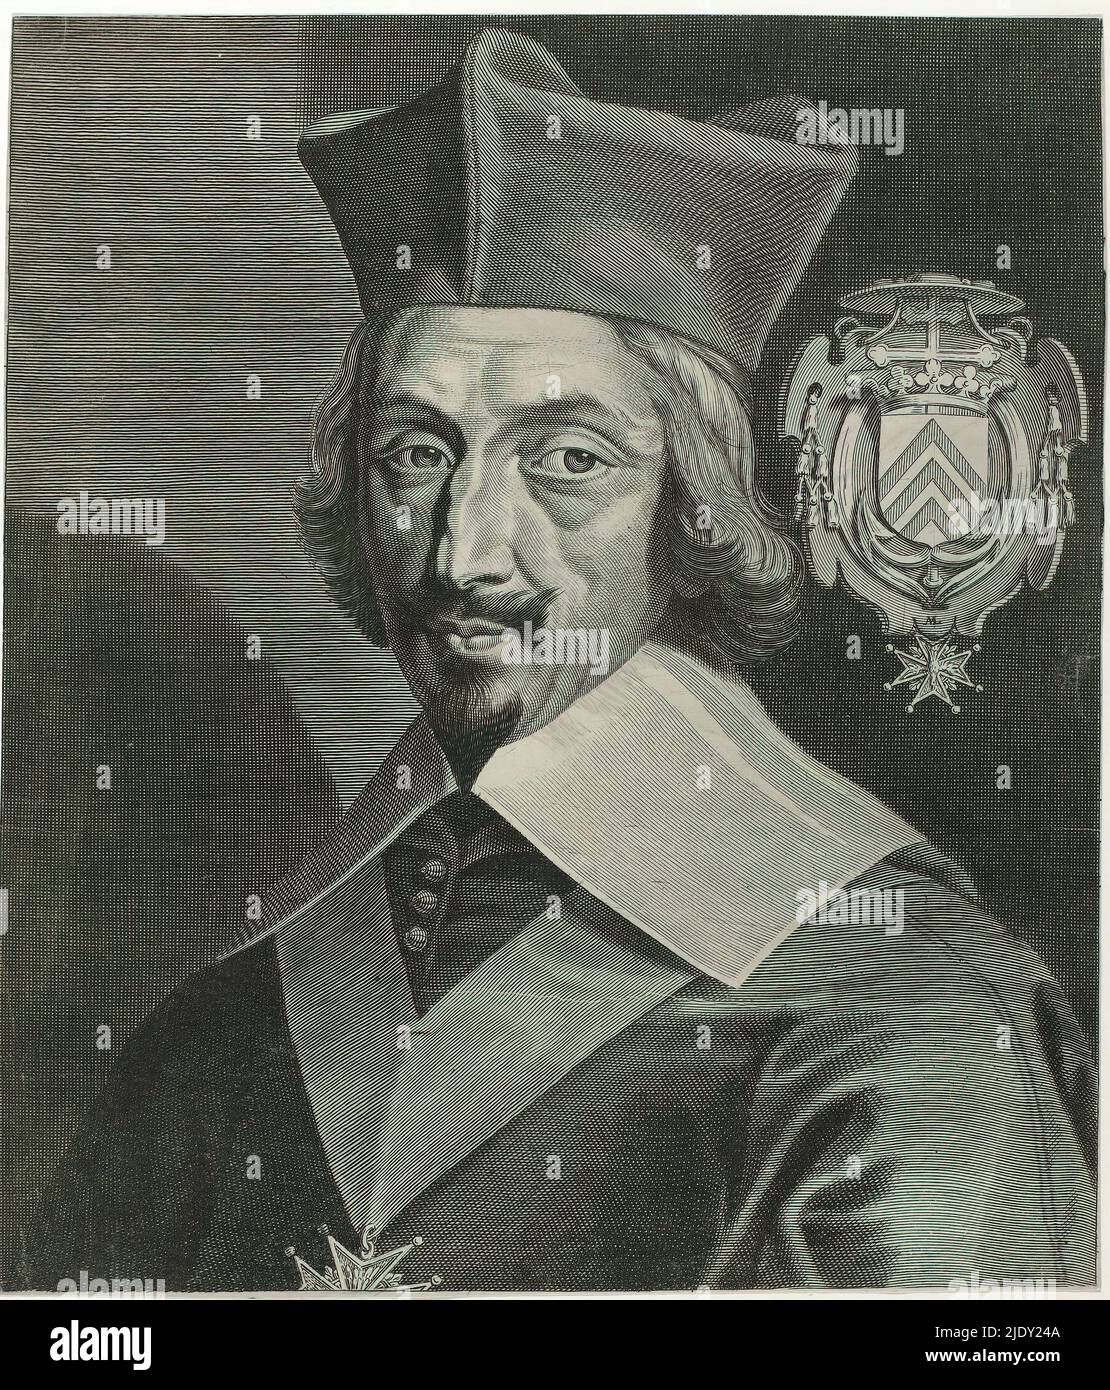 Portrait of Armand-Jean du Plessis Duke of Richelieu, print maker: Michel Lasne, (mentioned on object), 1600 - 1667, paper, engraving, height 297 mm × width 255 mm Stock Photo